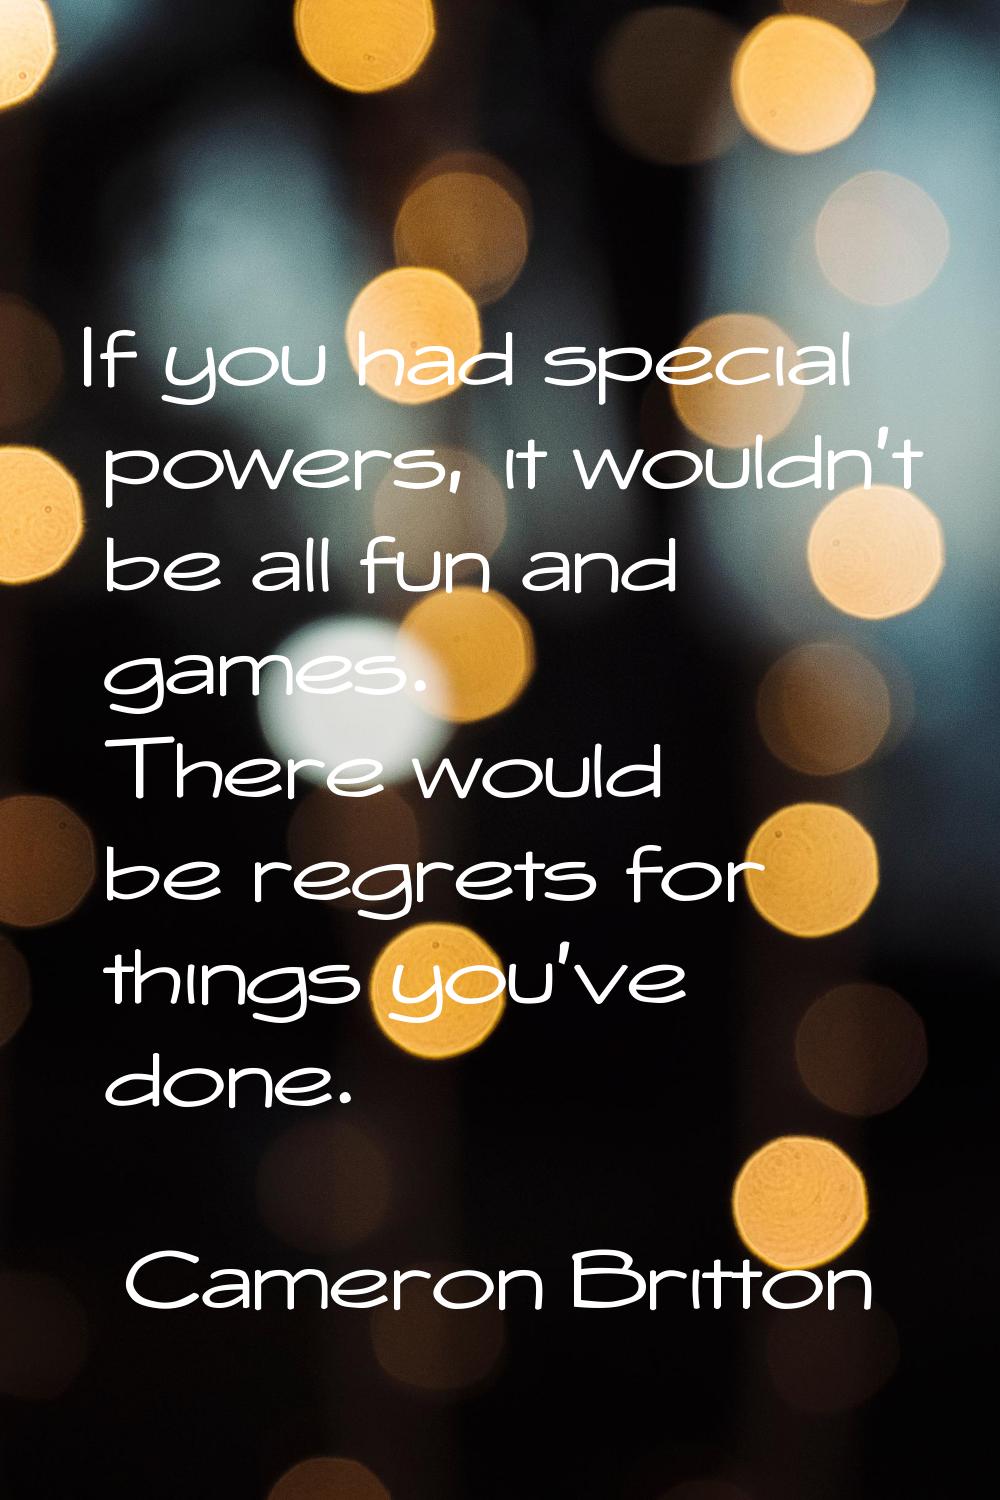 If you had special powers, it wouldn't be all fun and games. There would be regrets for things you'